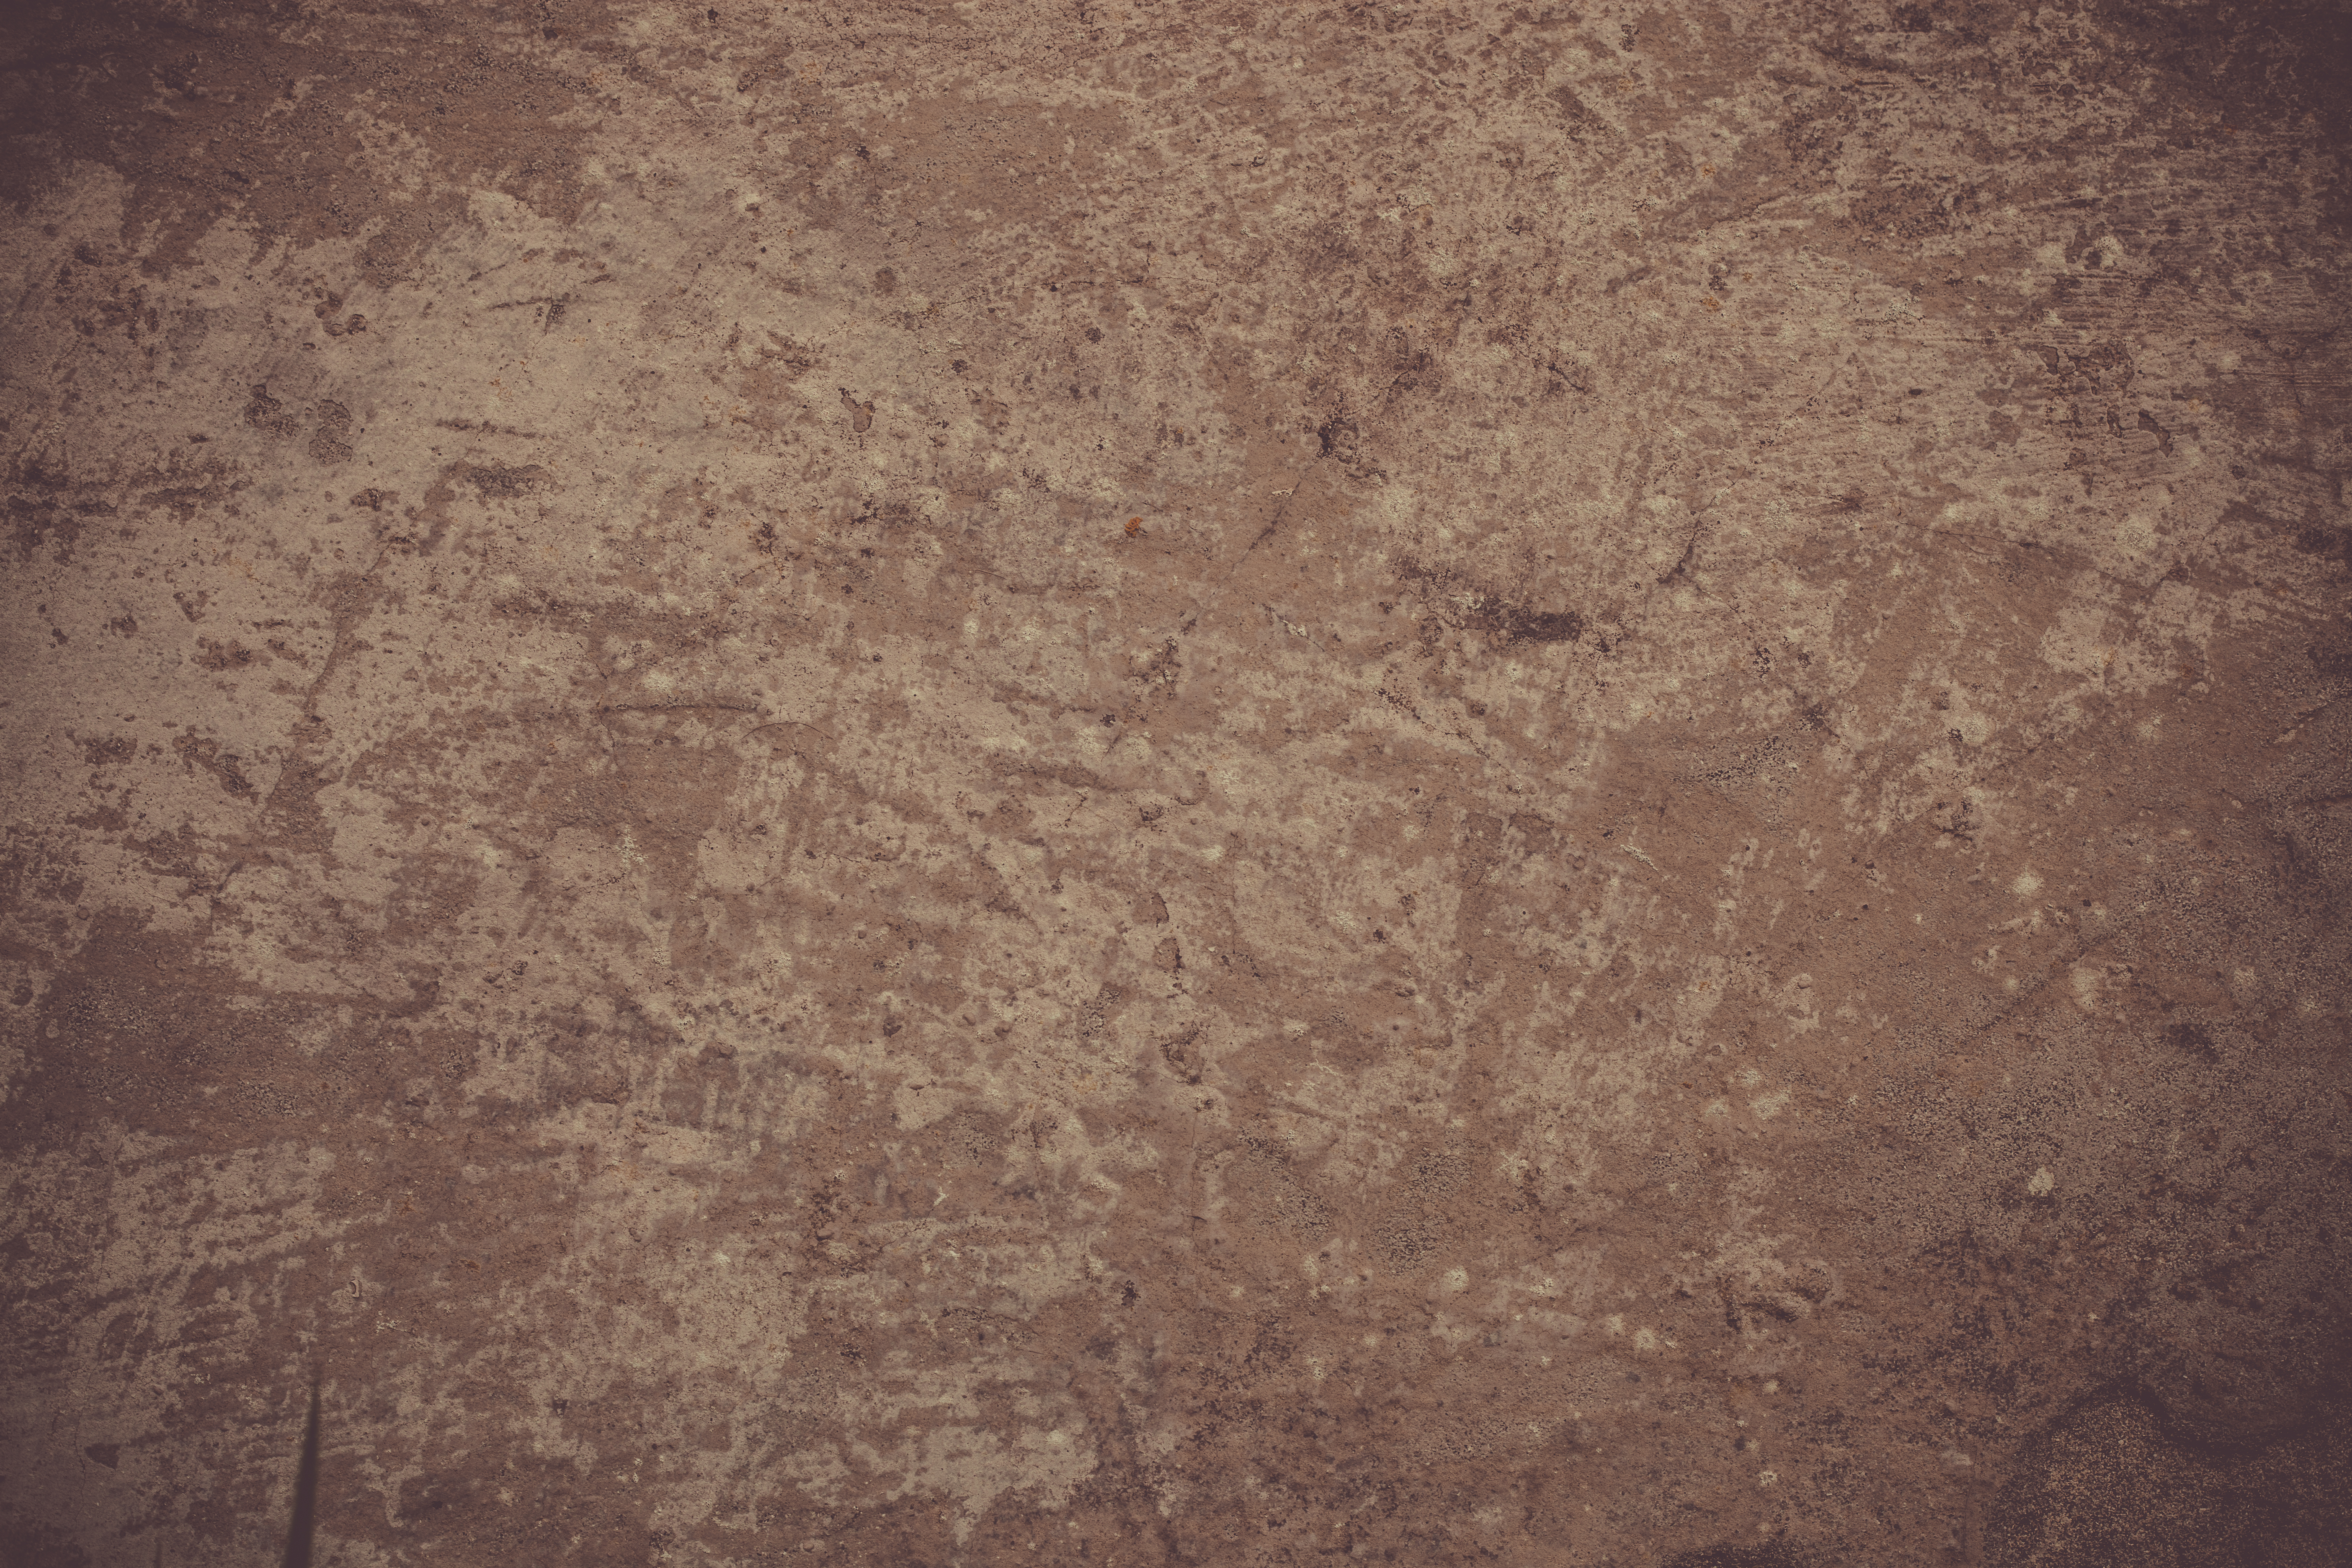 Grunge Scratched Wall, Concrete, Damaged, Grunge, Grungy, HQ Photo